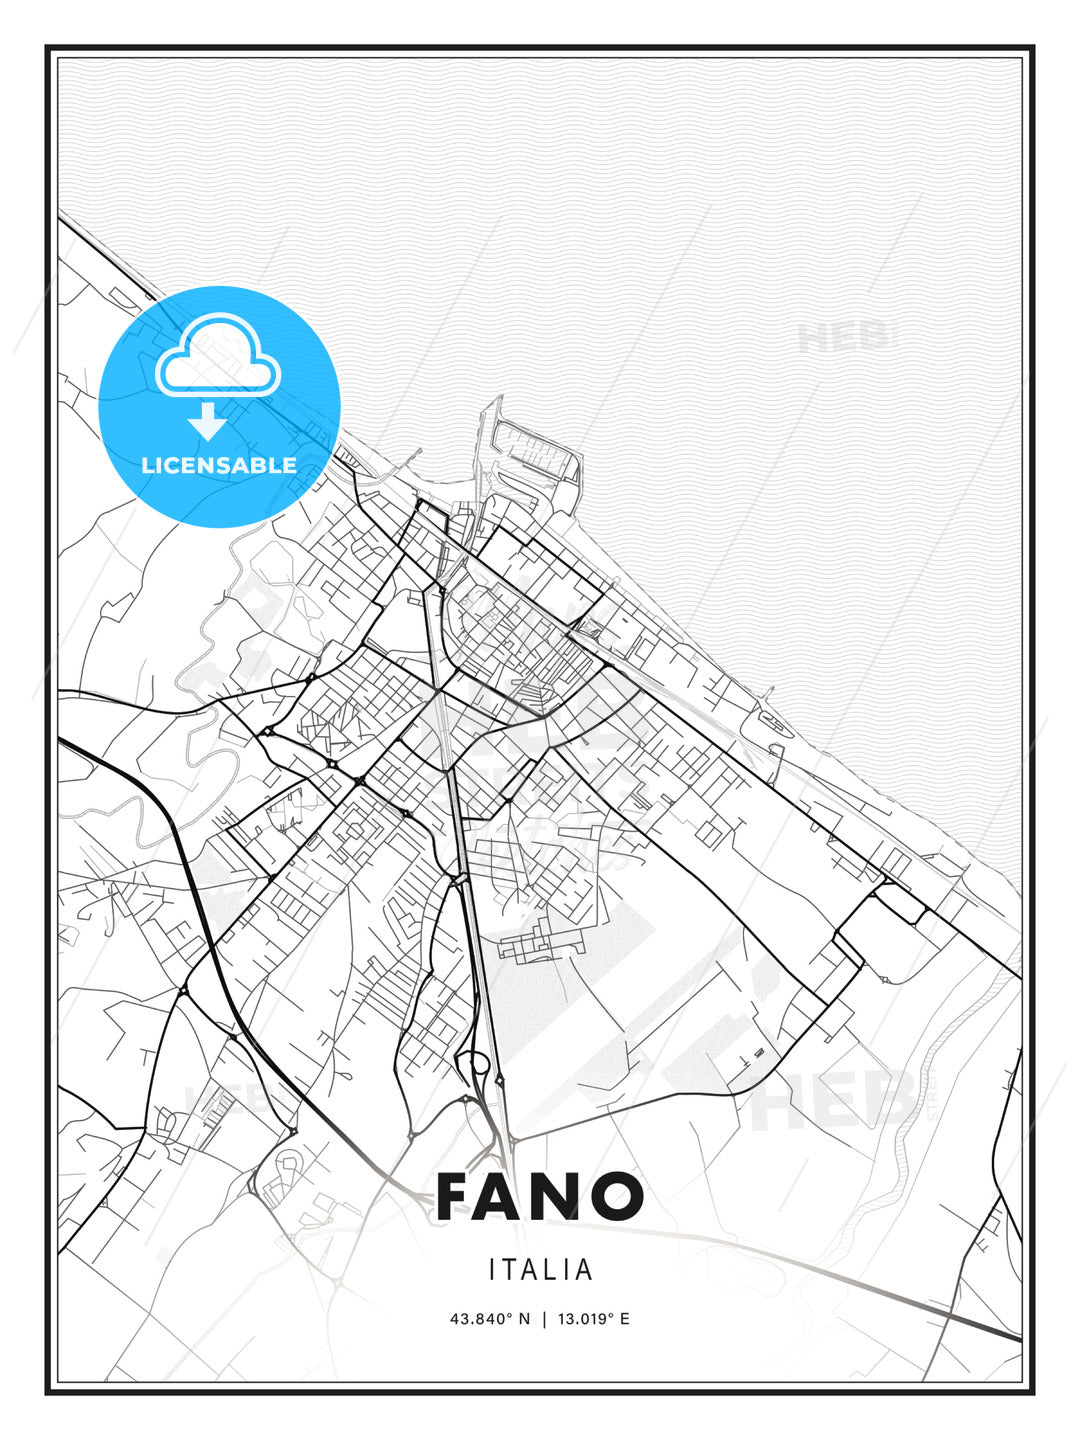 Fano, Italy, Modern Print Template in Various Formats - HEBSTREITS Sketches